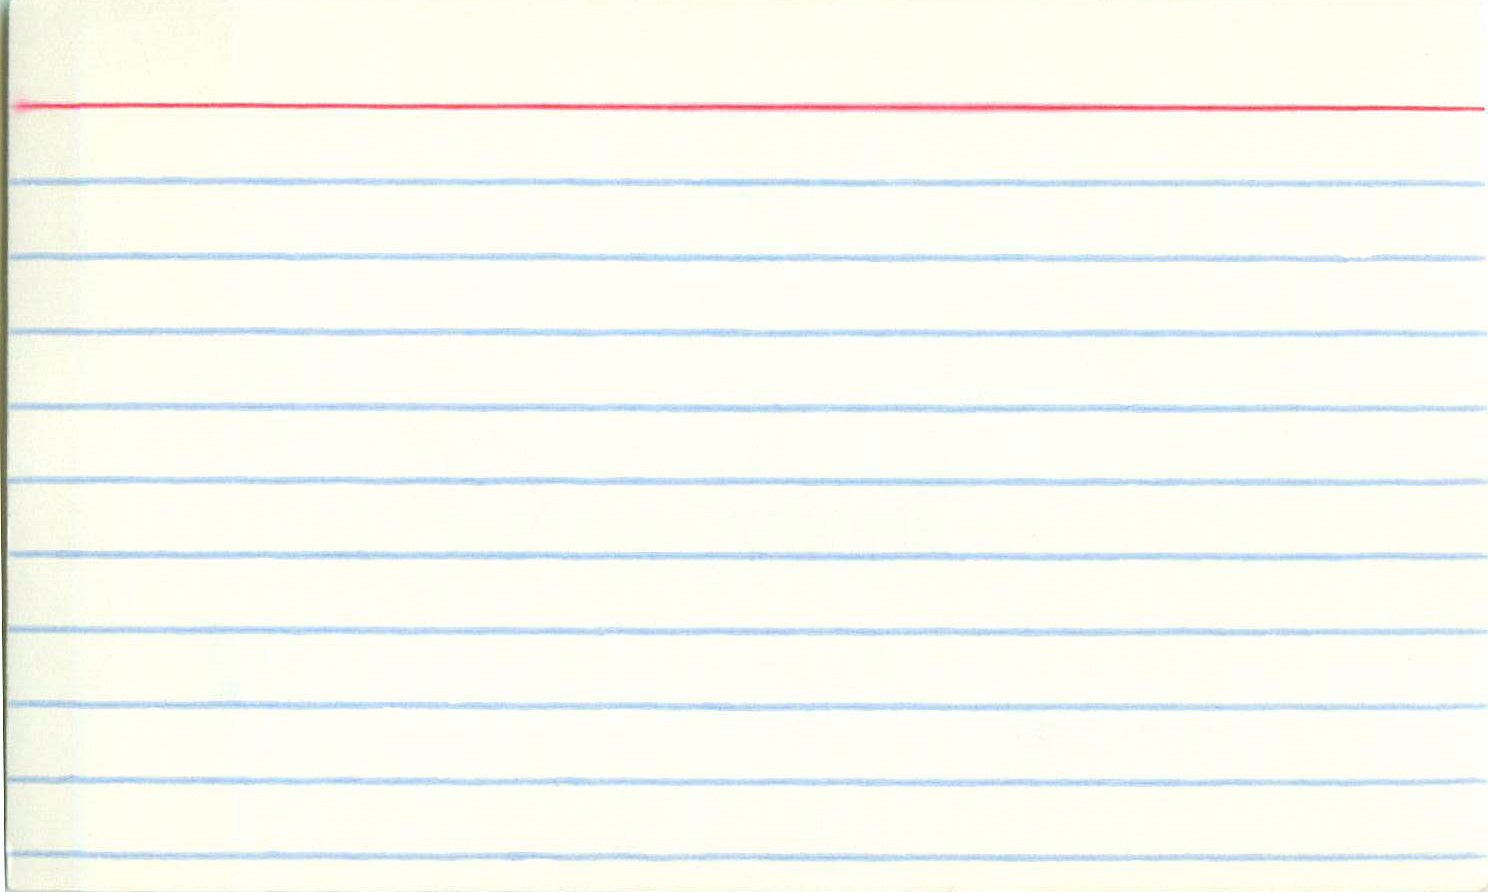 Blank index card! - StockPholio.com  Free Stock Photos With Word Template For 3X5 Index Cards